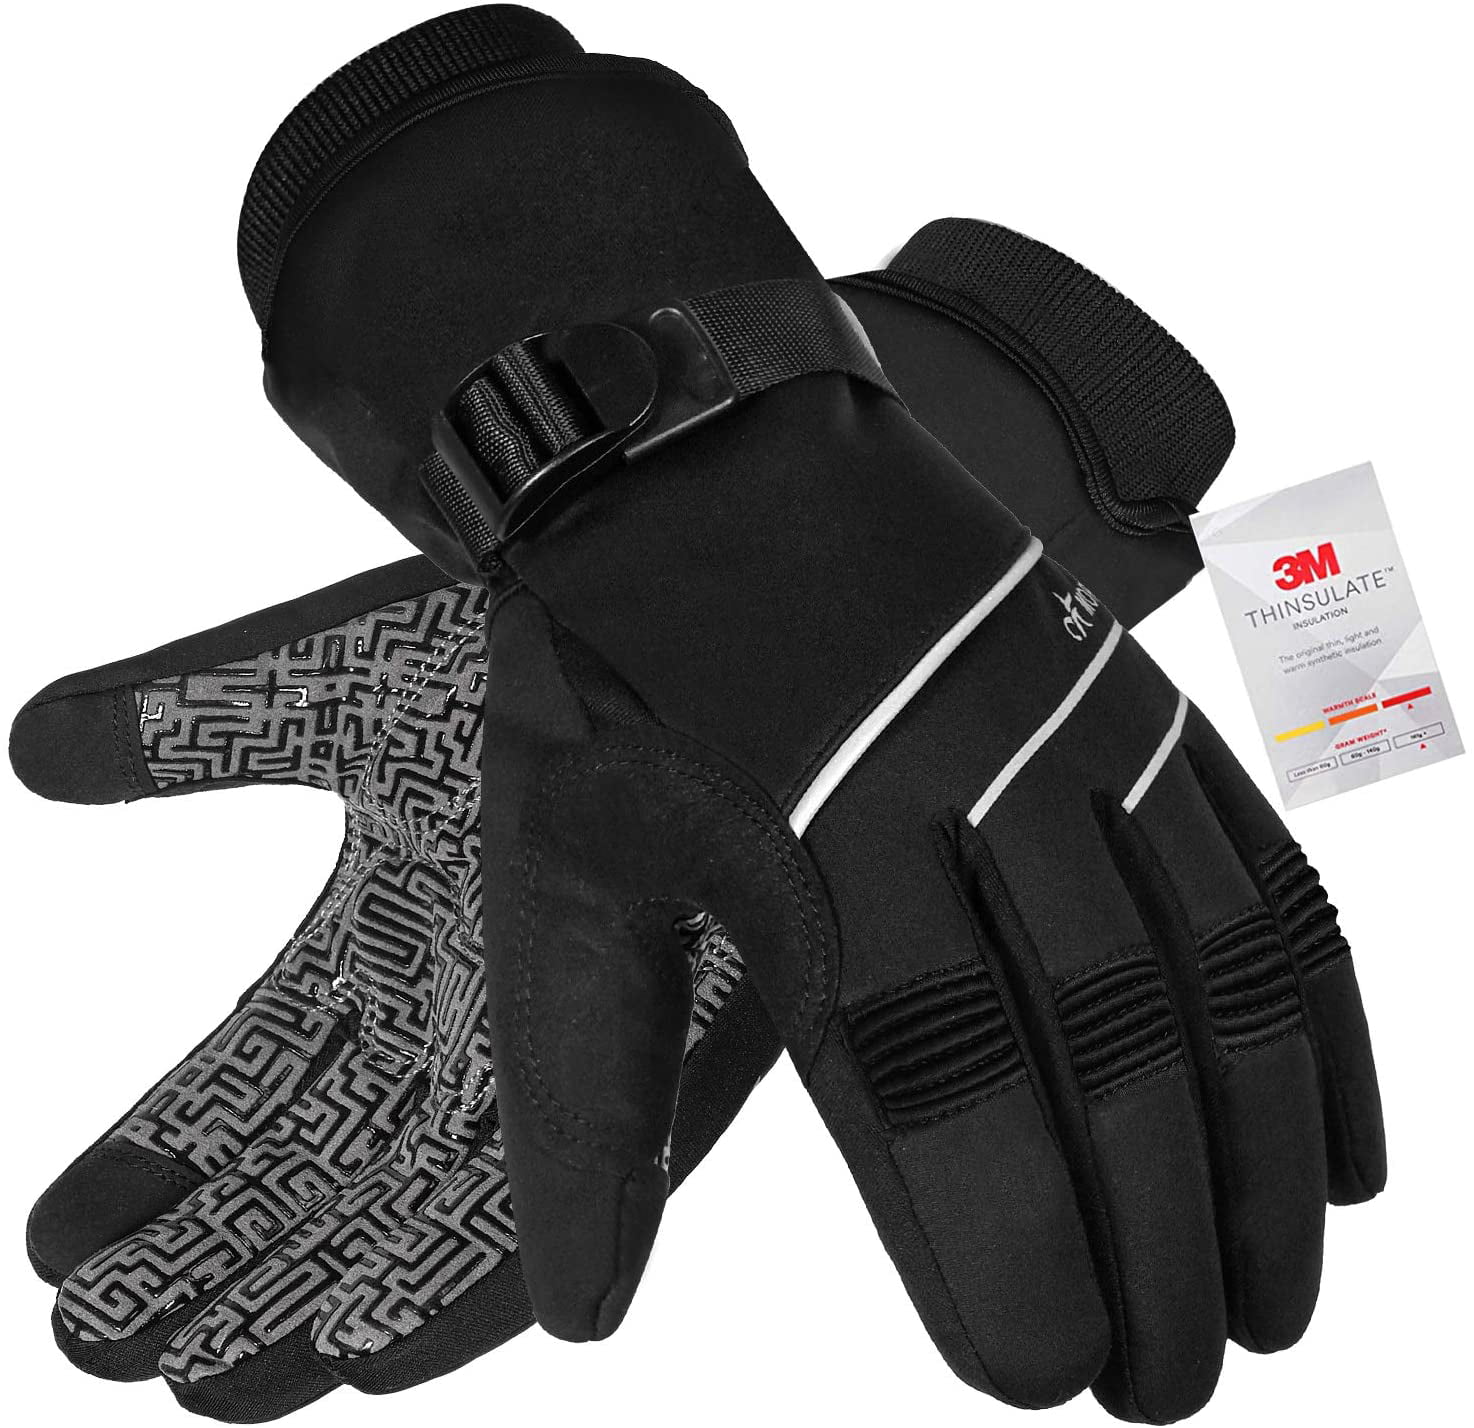 Unisex 3M Thinsulate Insulated Warm Winter Snow Gloves for Men Women Windproof 